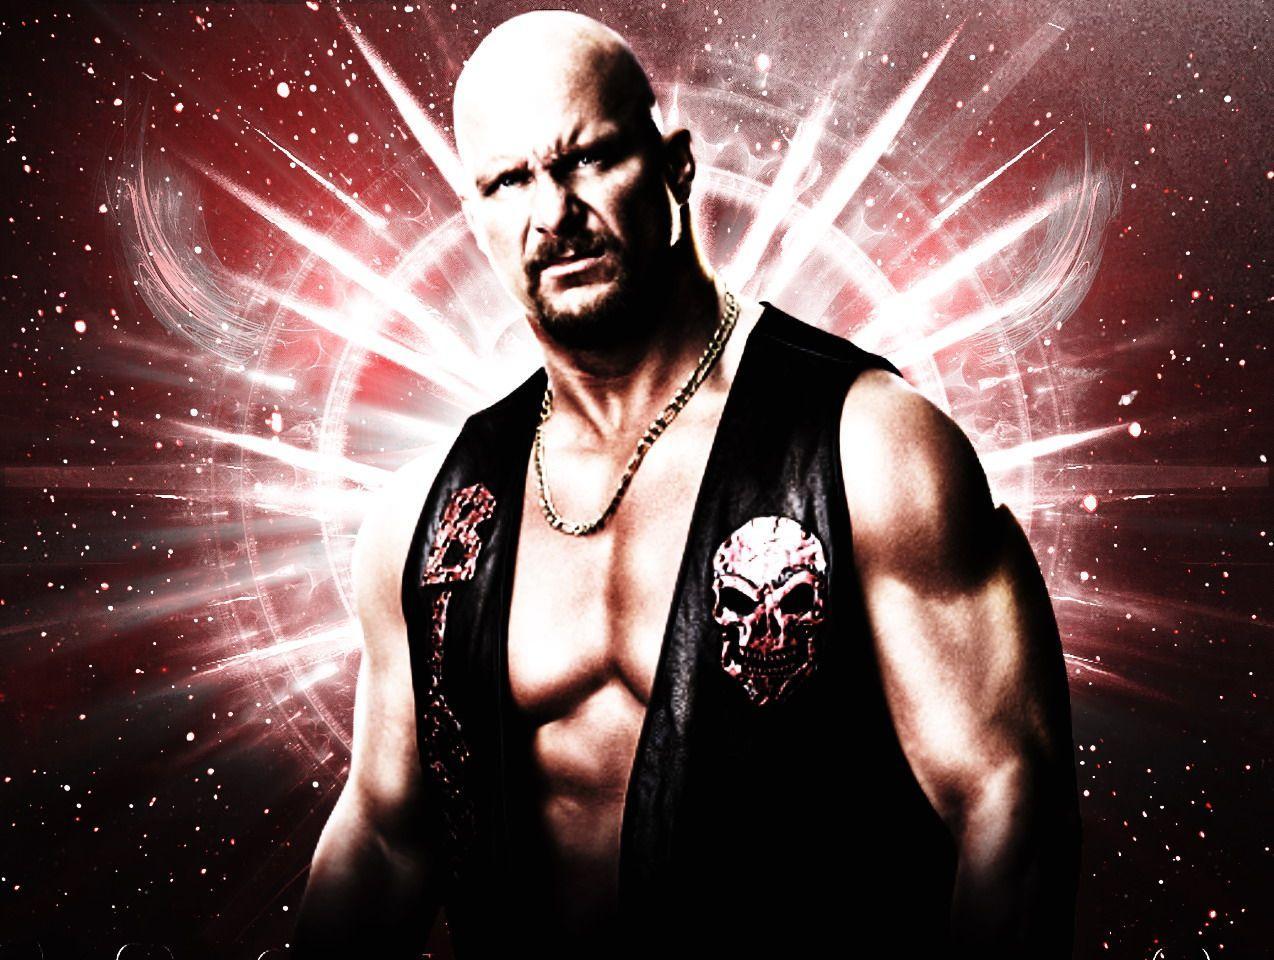 Download Top HD Sports Wallpaper For Windows: Stone Cold Steve